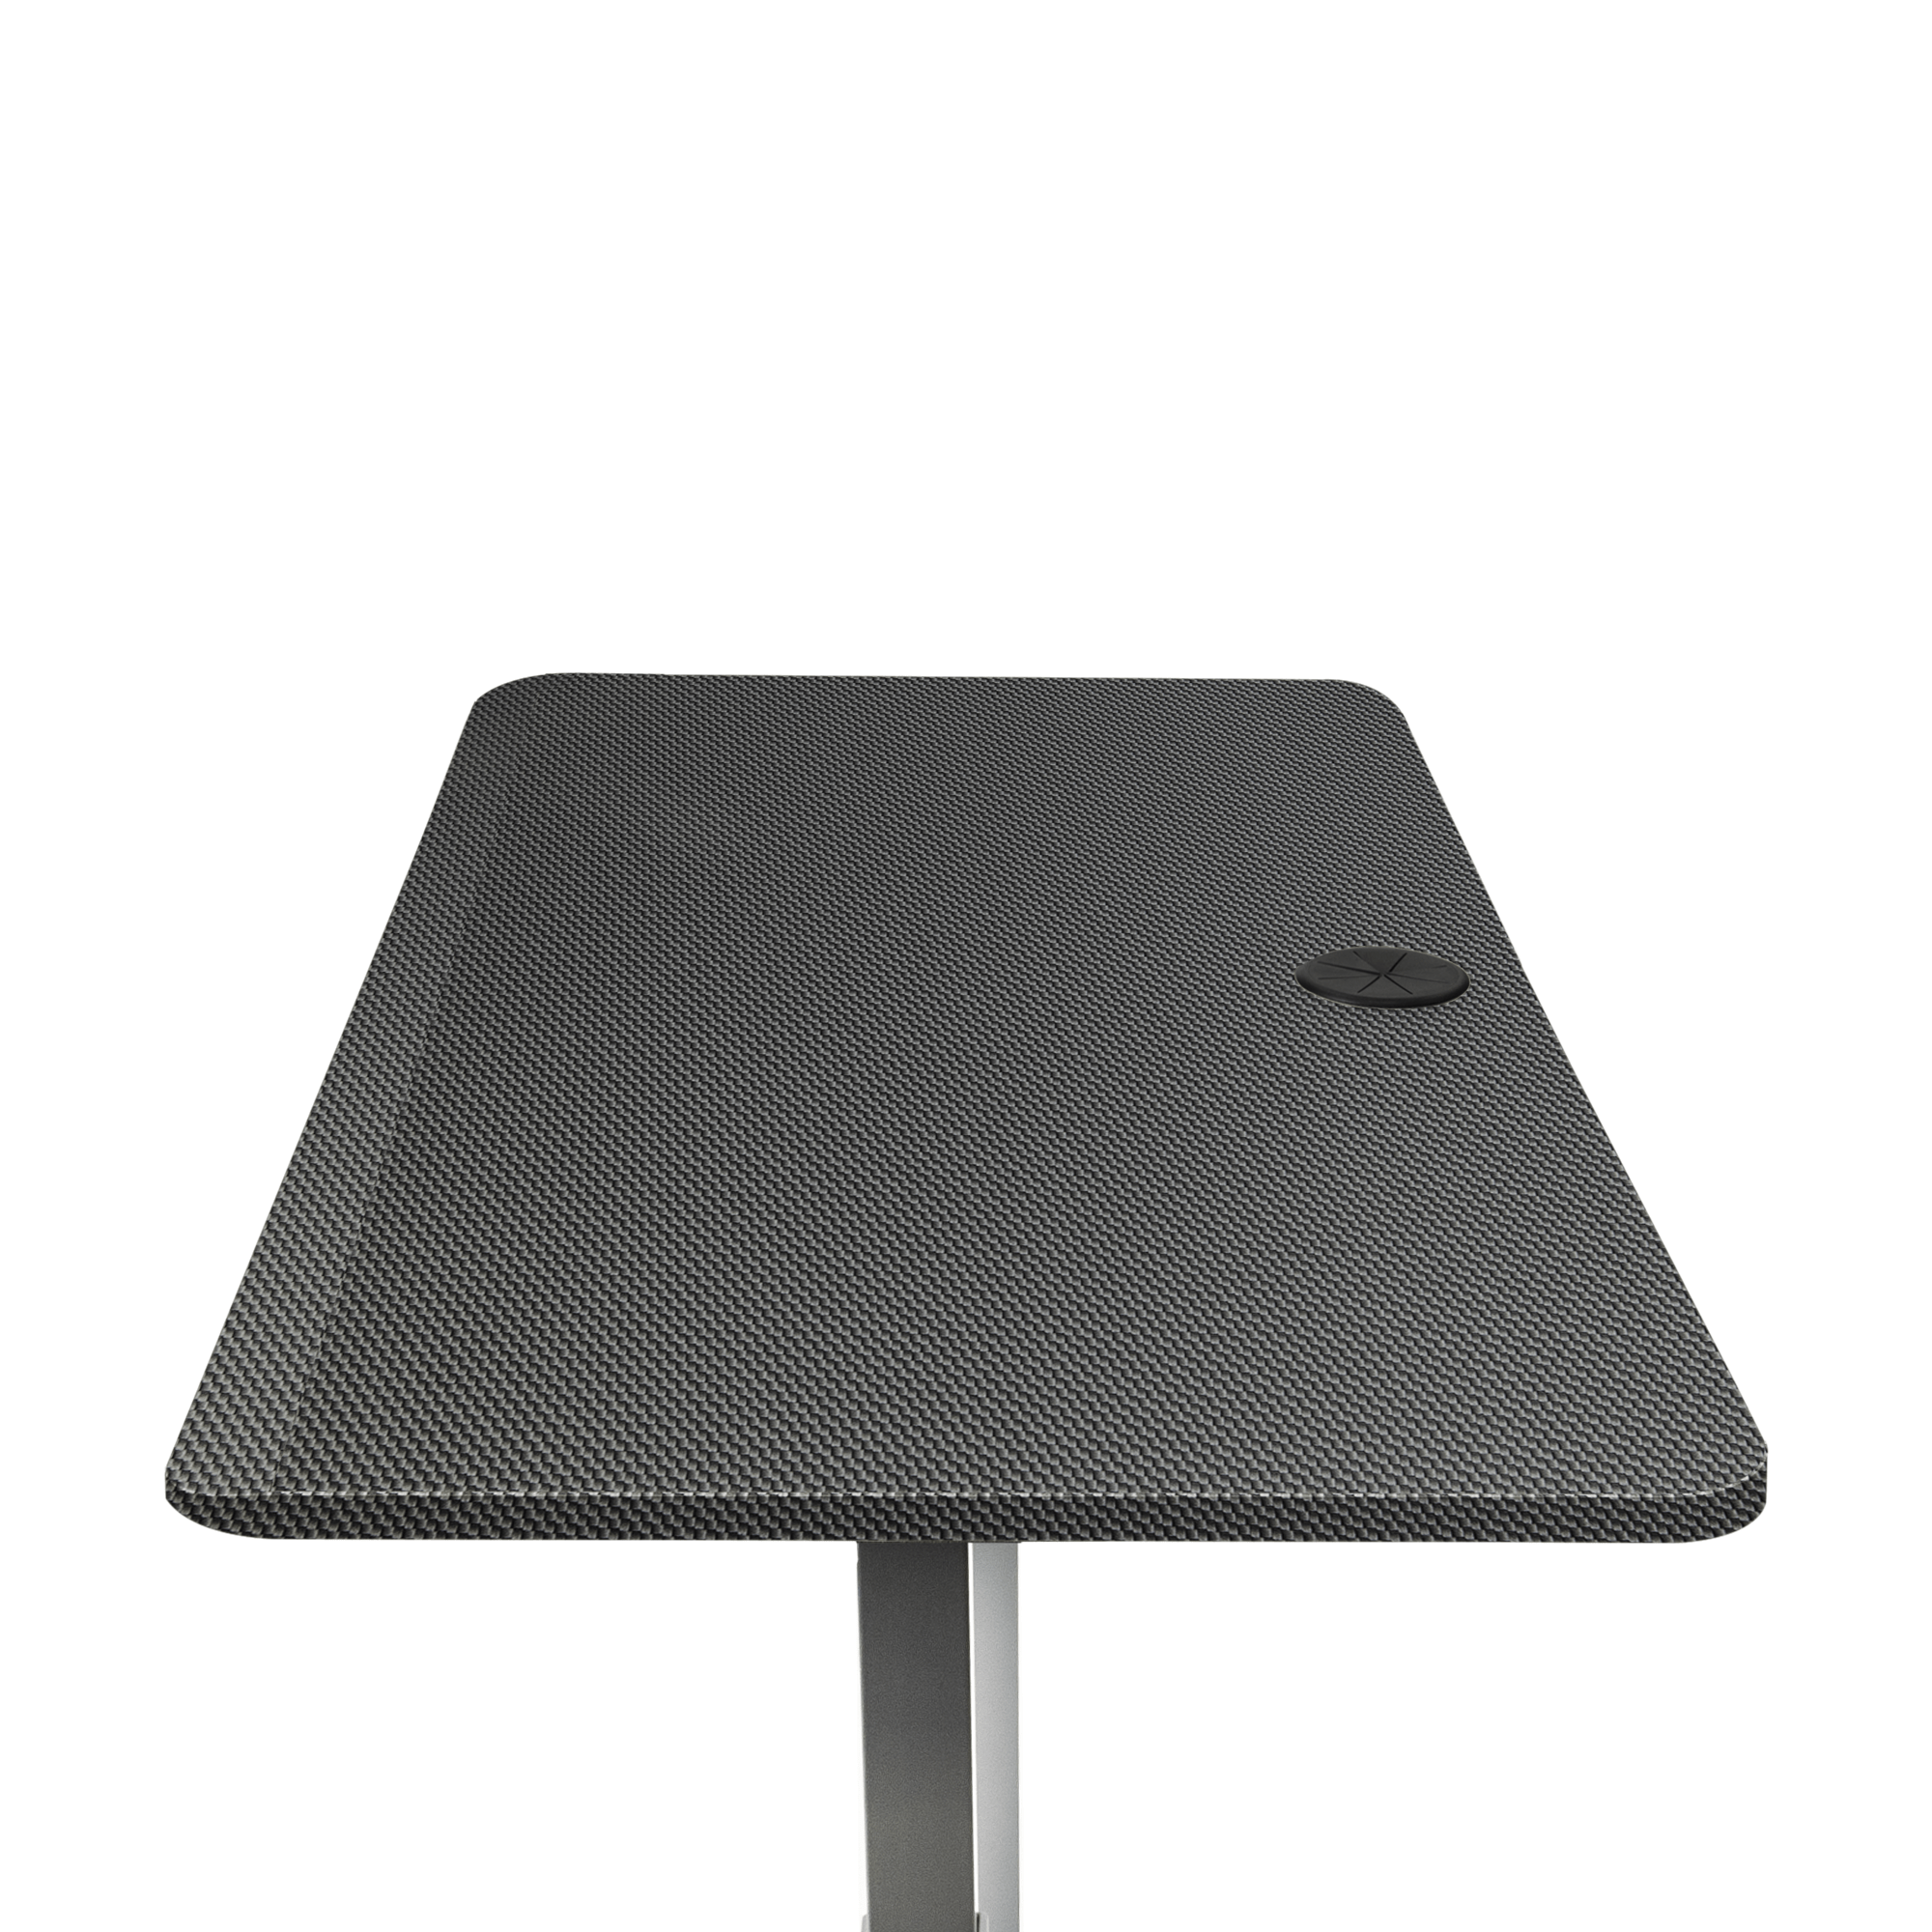 Side Table for Standing Desk - Color: Carbon Fiber - Top View showing one grommet 